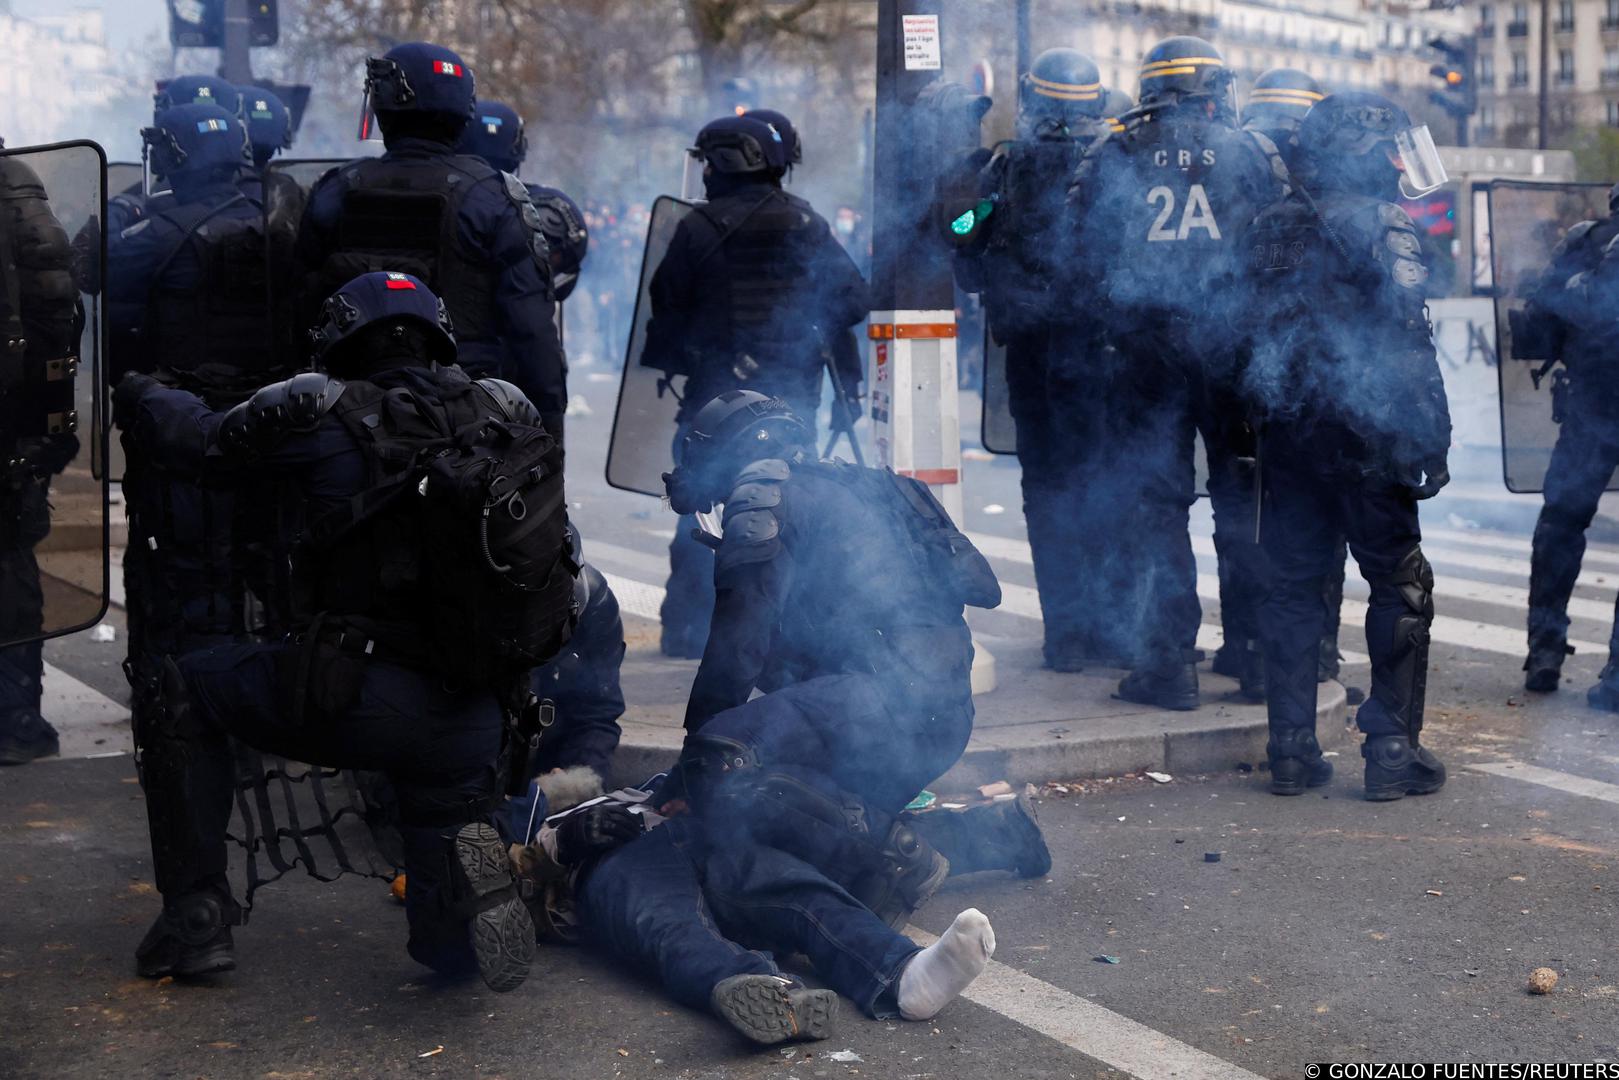 French riot police surround a protester lying on the ground during clashes at a demonstration as part of the tenth day of nationwide strikes and protests against French government's pension reform, in Paris, France, March 28, 2023. REUTERS/Gonzalo Fuentes Photo: GONZALO FUENTES/REUTERS